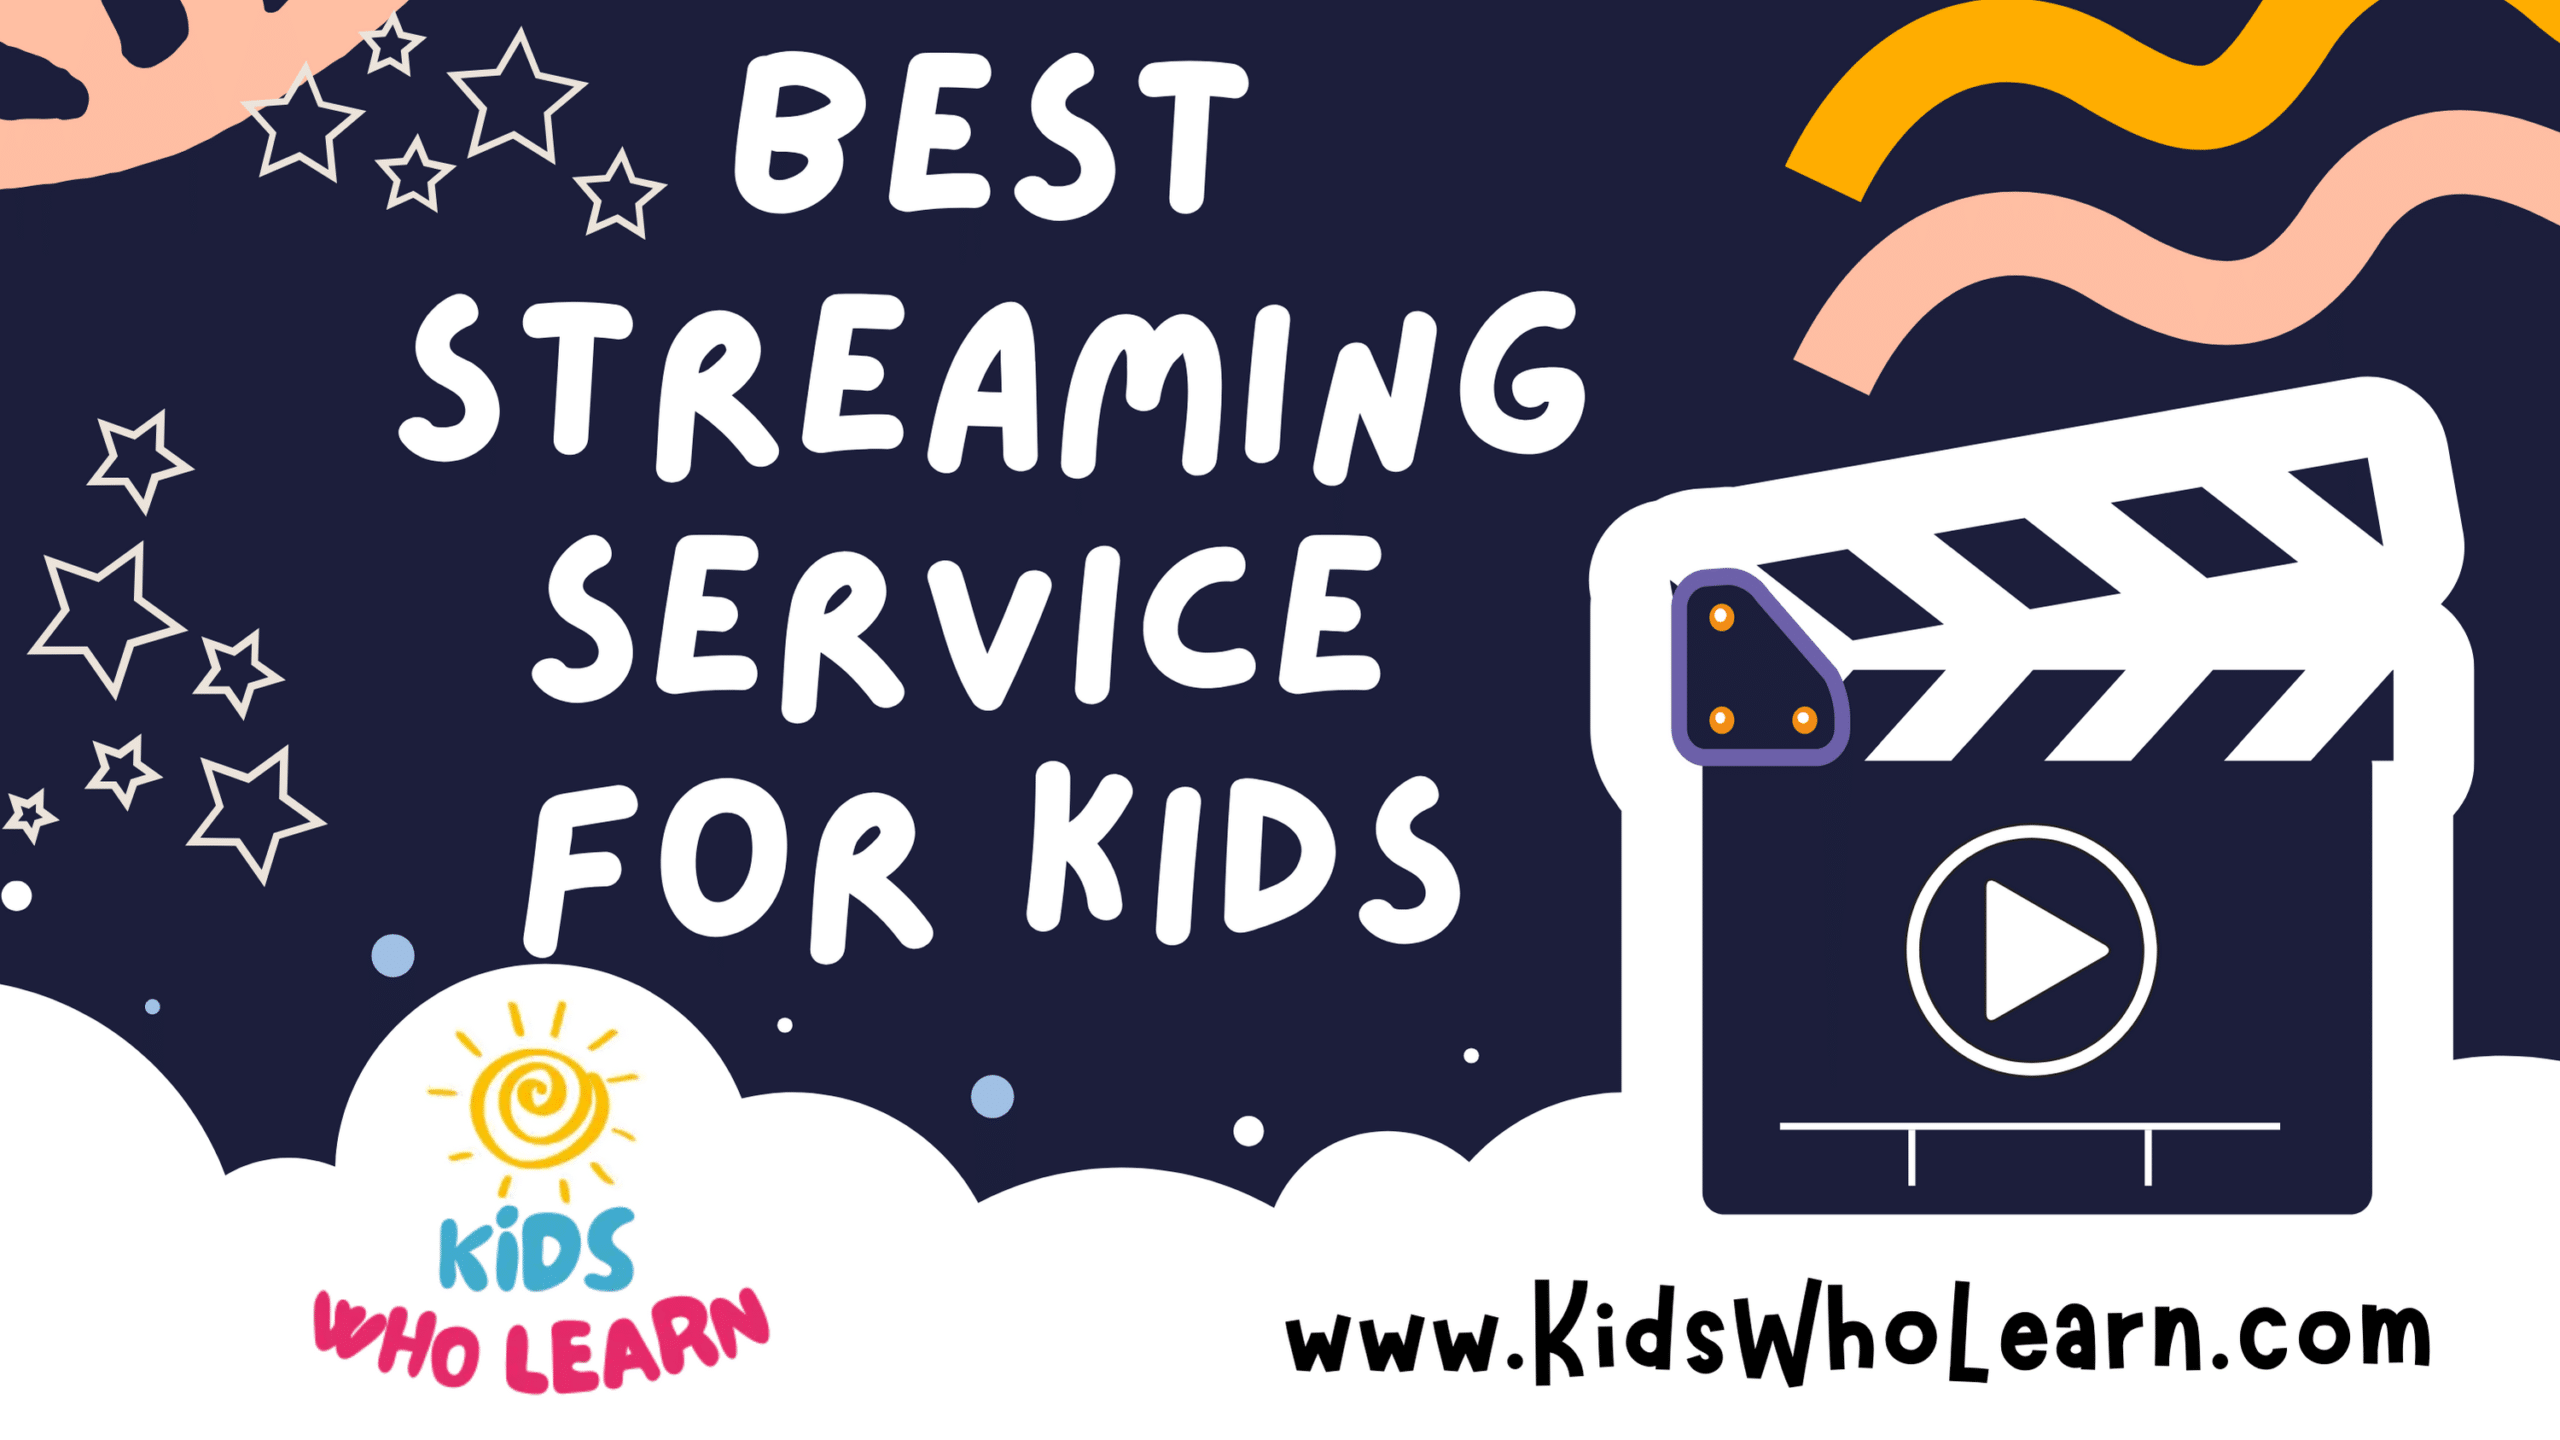 Best Streaming Service For Kids